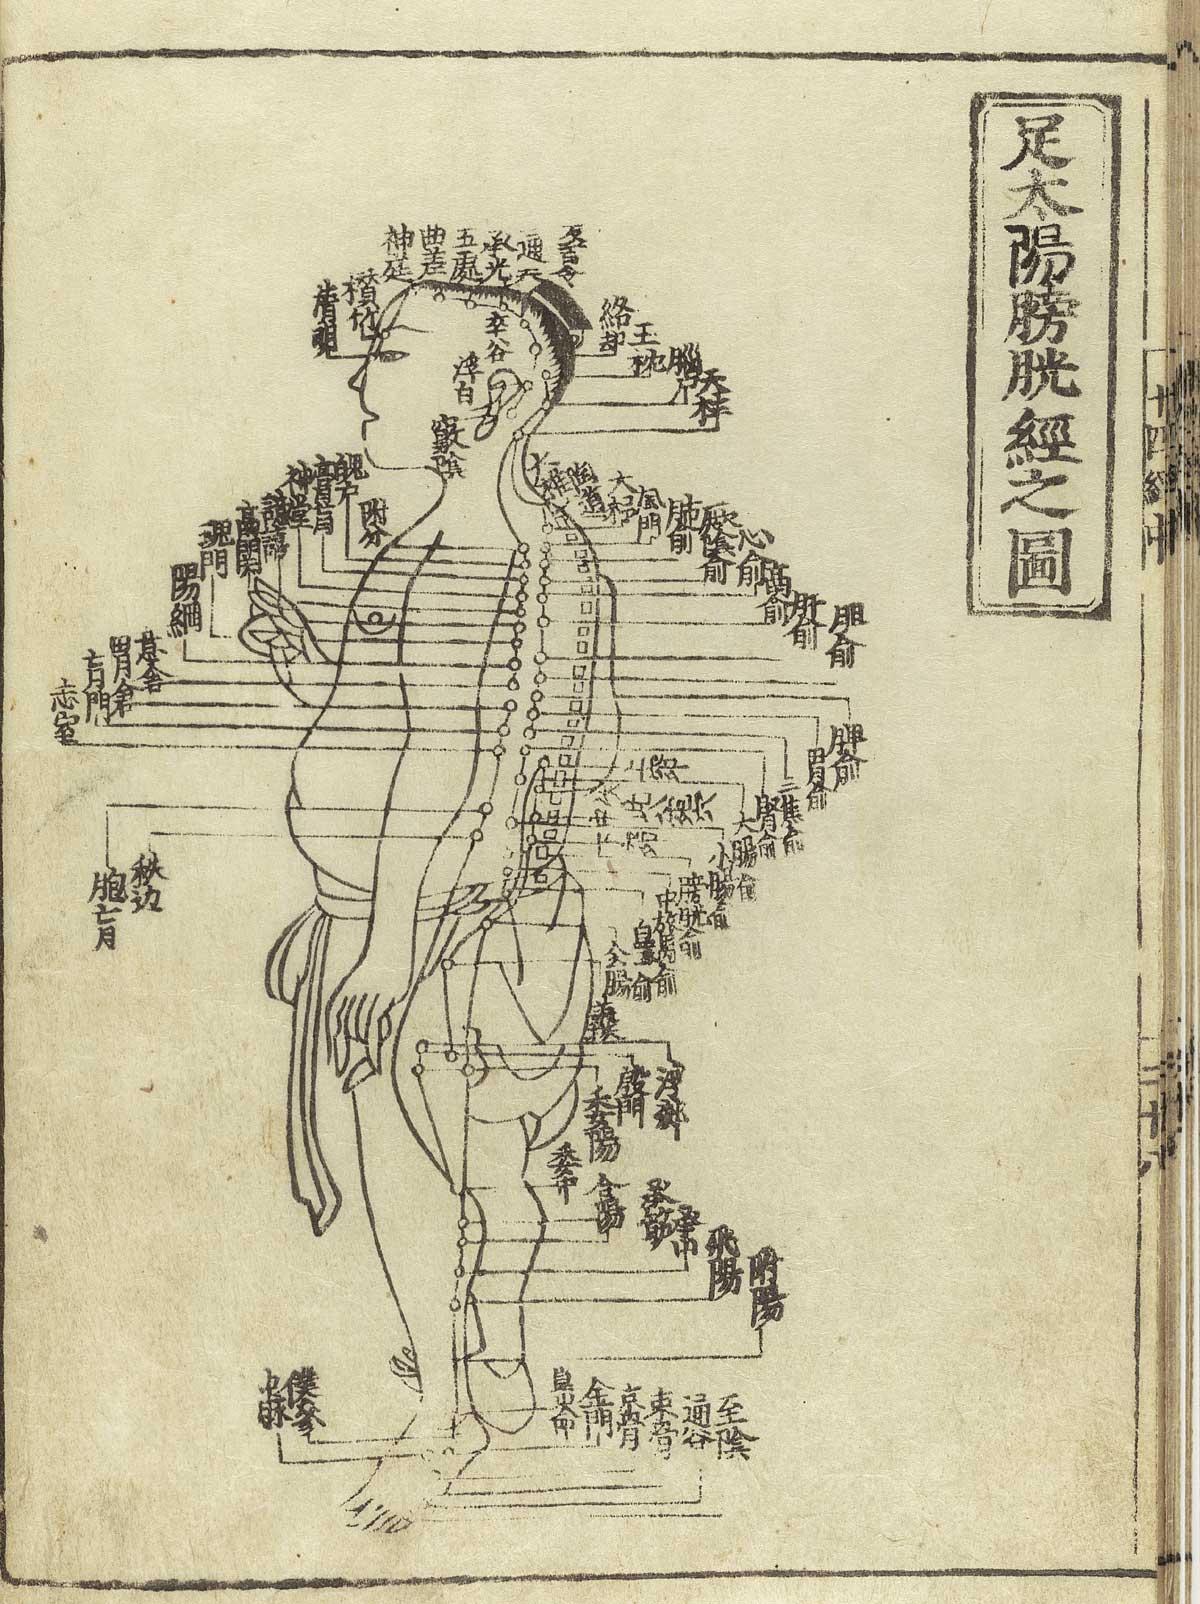 Woodcut showing the Taiyang bladder meridian of foot of a standing male figure in profile wearing a loin cloth with meridians indicated down the arms, back, legs and chest with Chinese characters giving names of the points, from Hua Shou’s Jushikei hakki, NLM Call no.: WZ 260 H868s 1716.